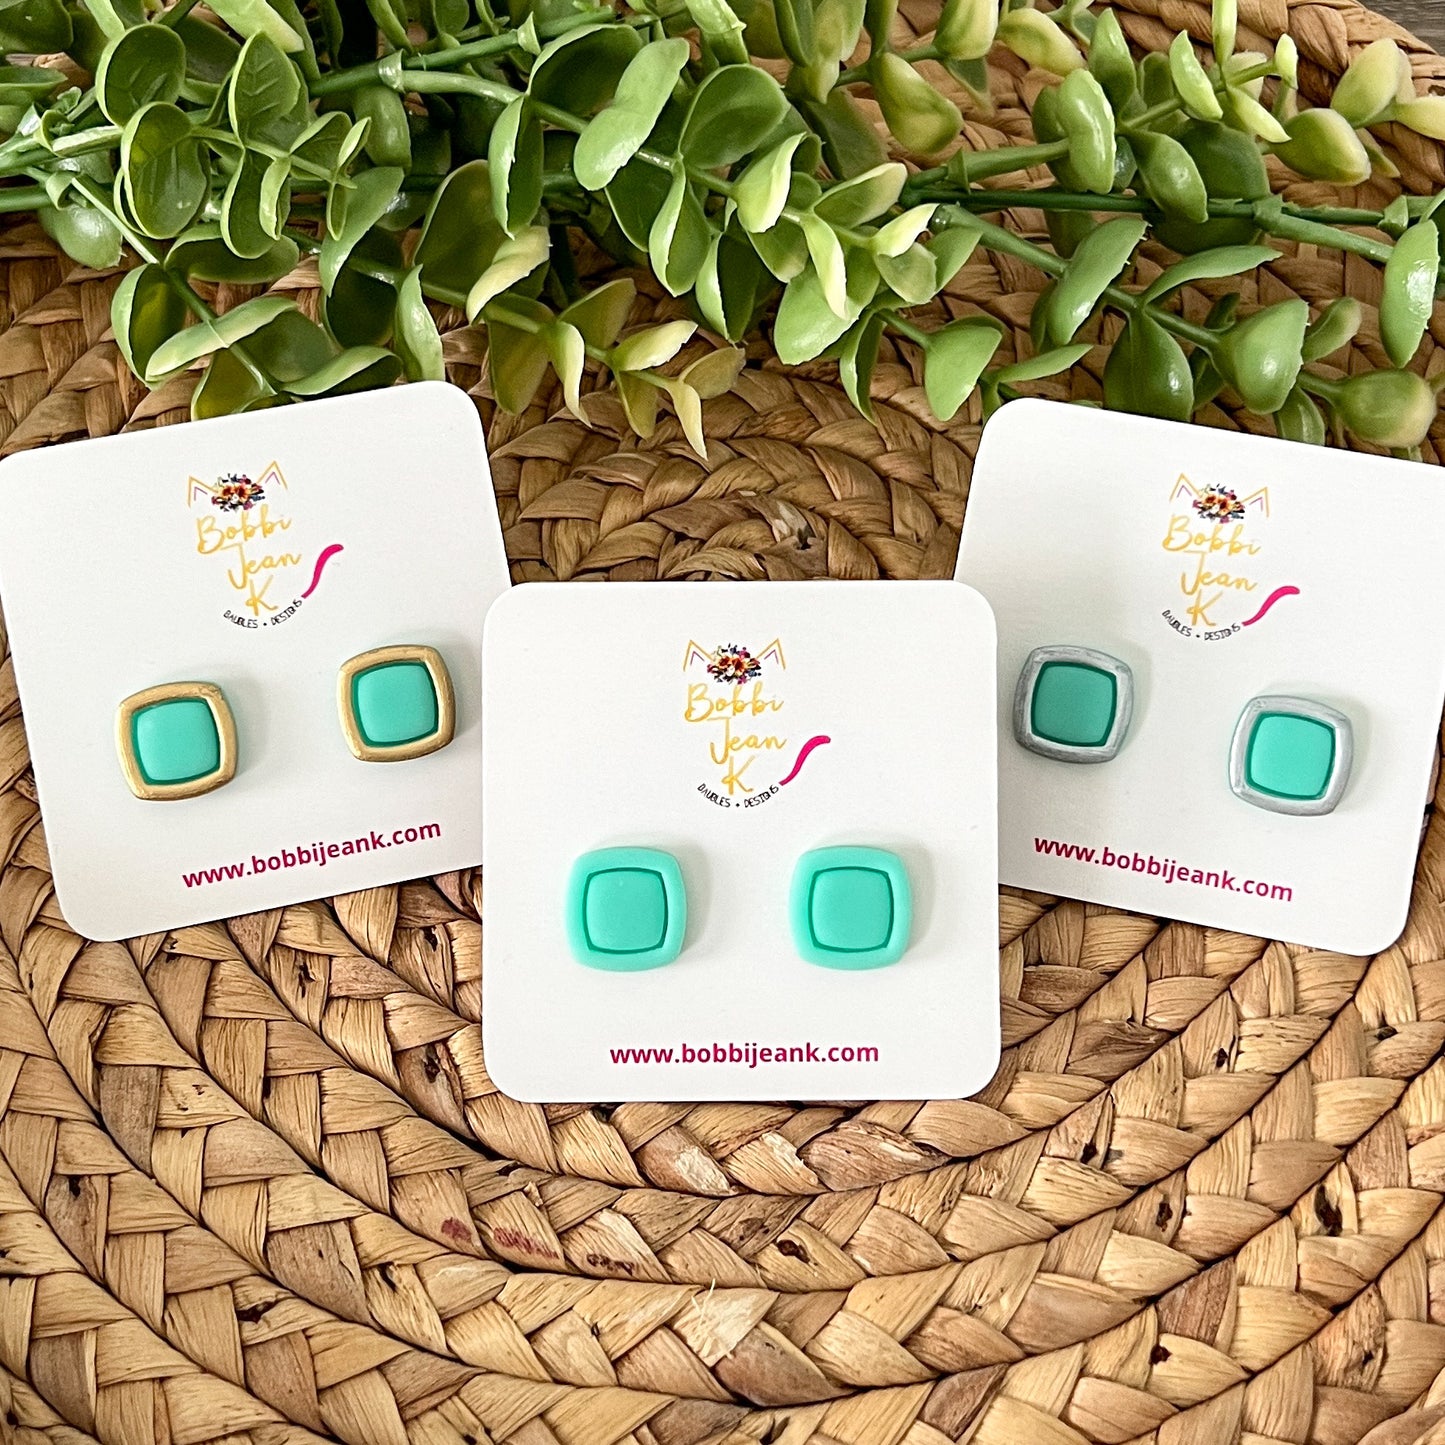 Mint Green "Piped" Square Clay Studs: Choose Solid, Silver, or Gold Rimmed - LAST CHANCE